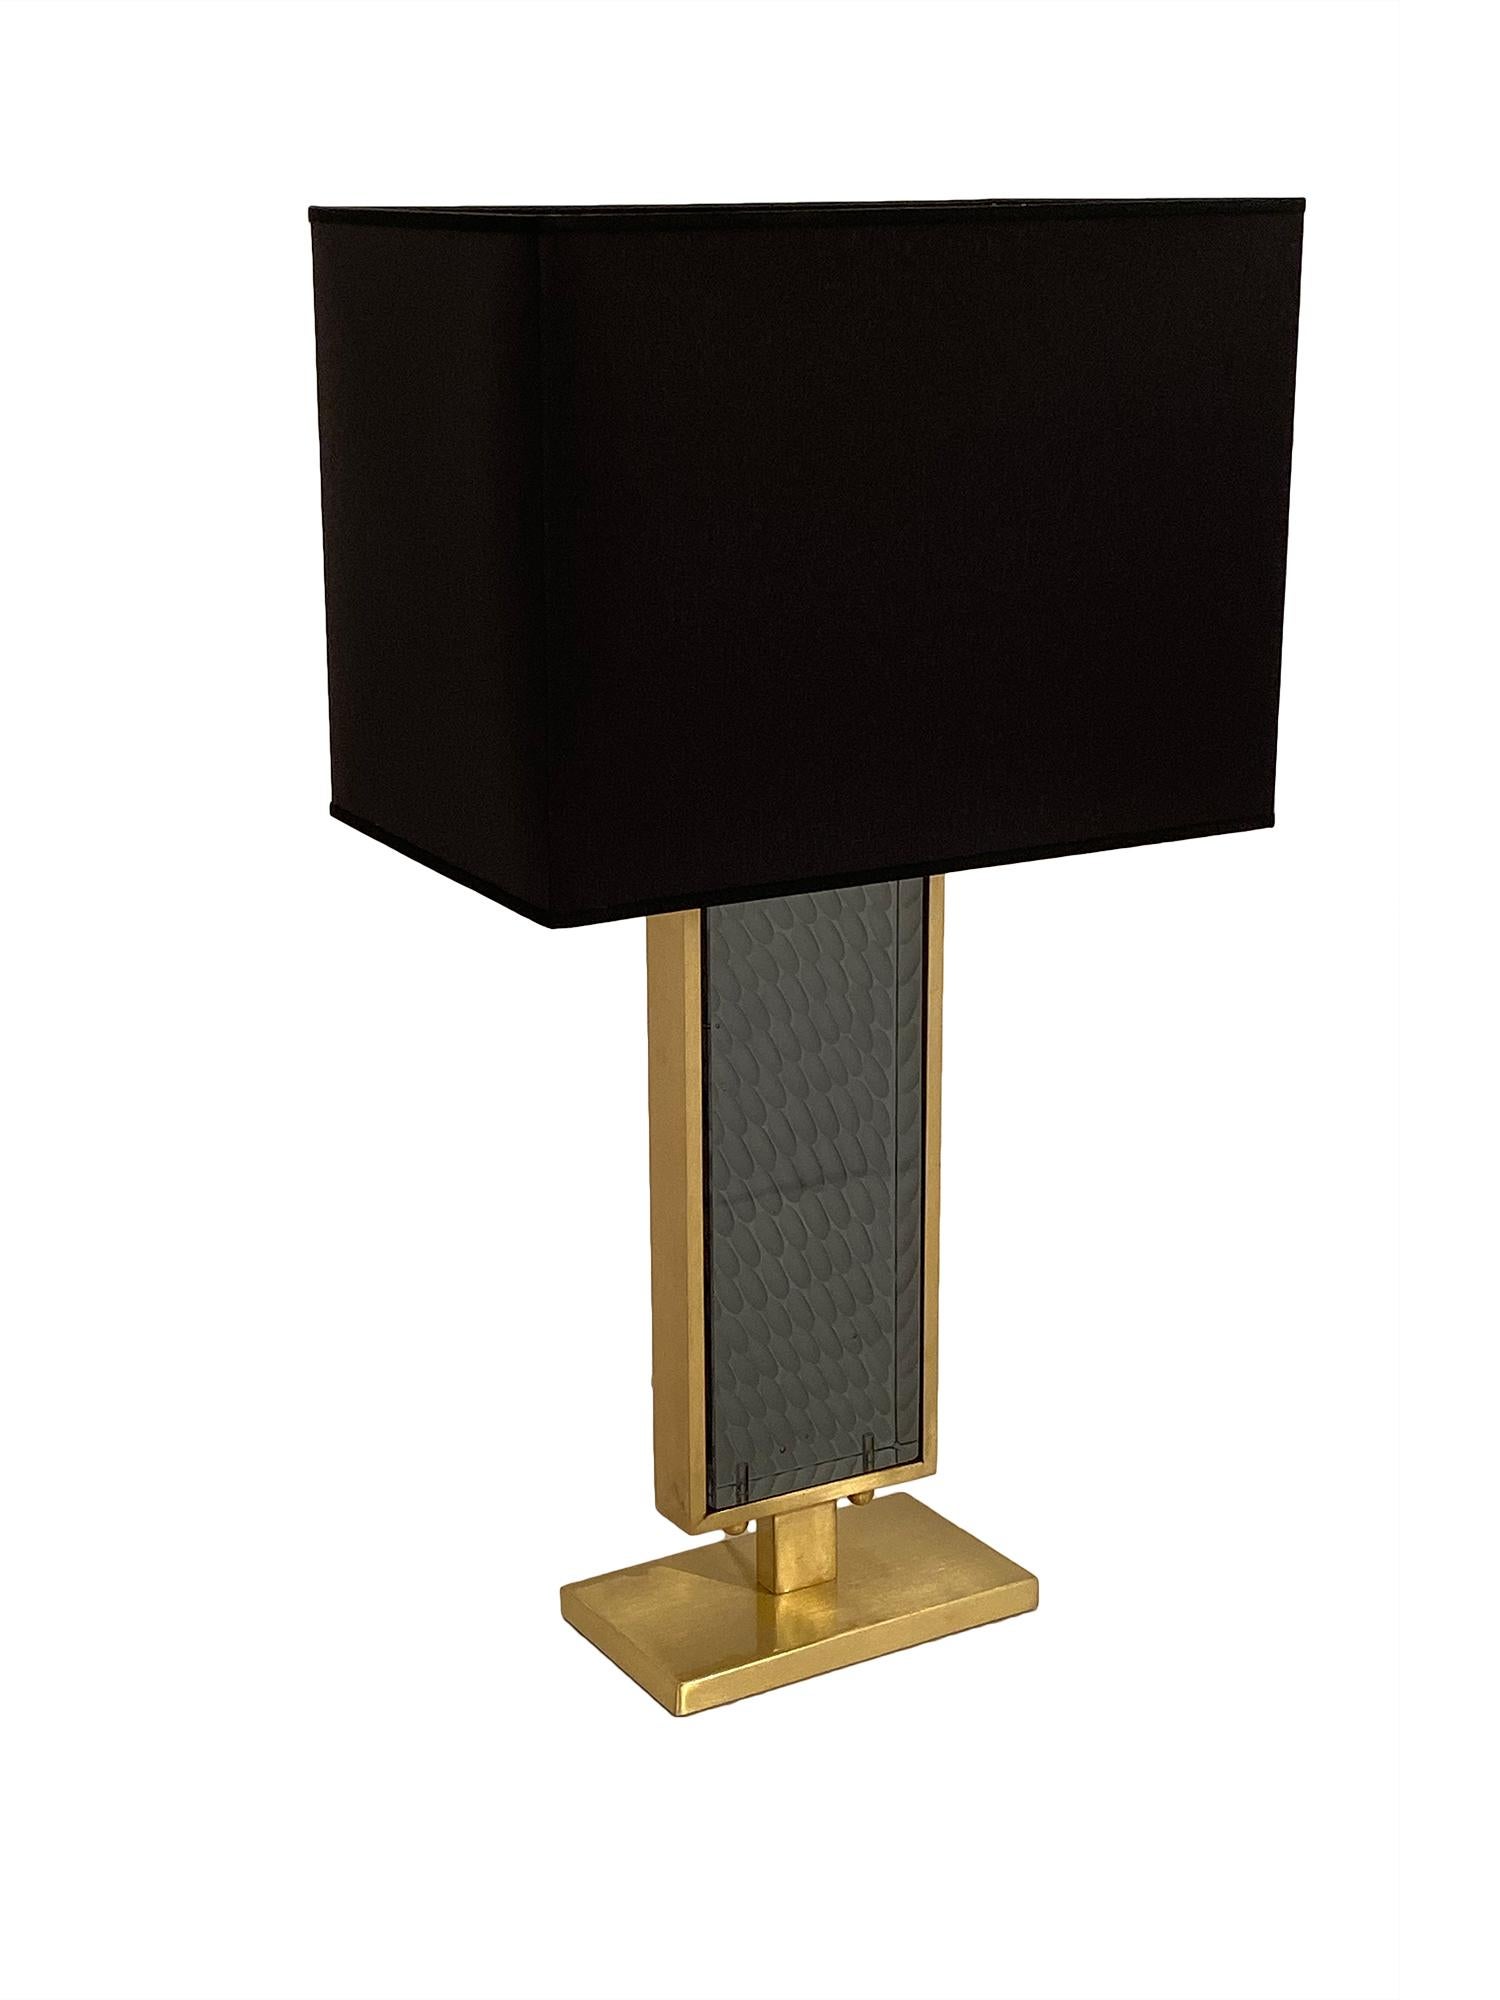 Murano glass in a gray hue and solid brass make this beautiful table lamp so stunning. With a rectangular base, the opaque gray colored glass is surrounded by brass, and light is able to pass through the glass in remarkable ways. The glass is